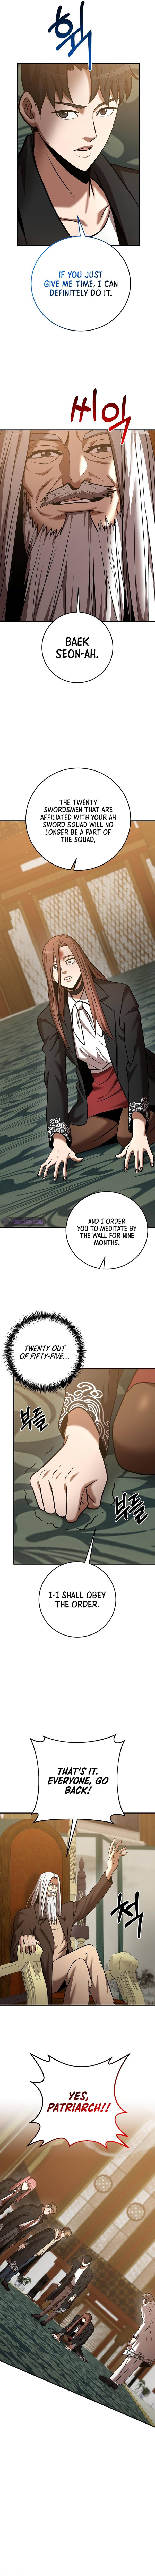 I Became a Renowned Family’s Sword Prodigy Chapter 33 page 7